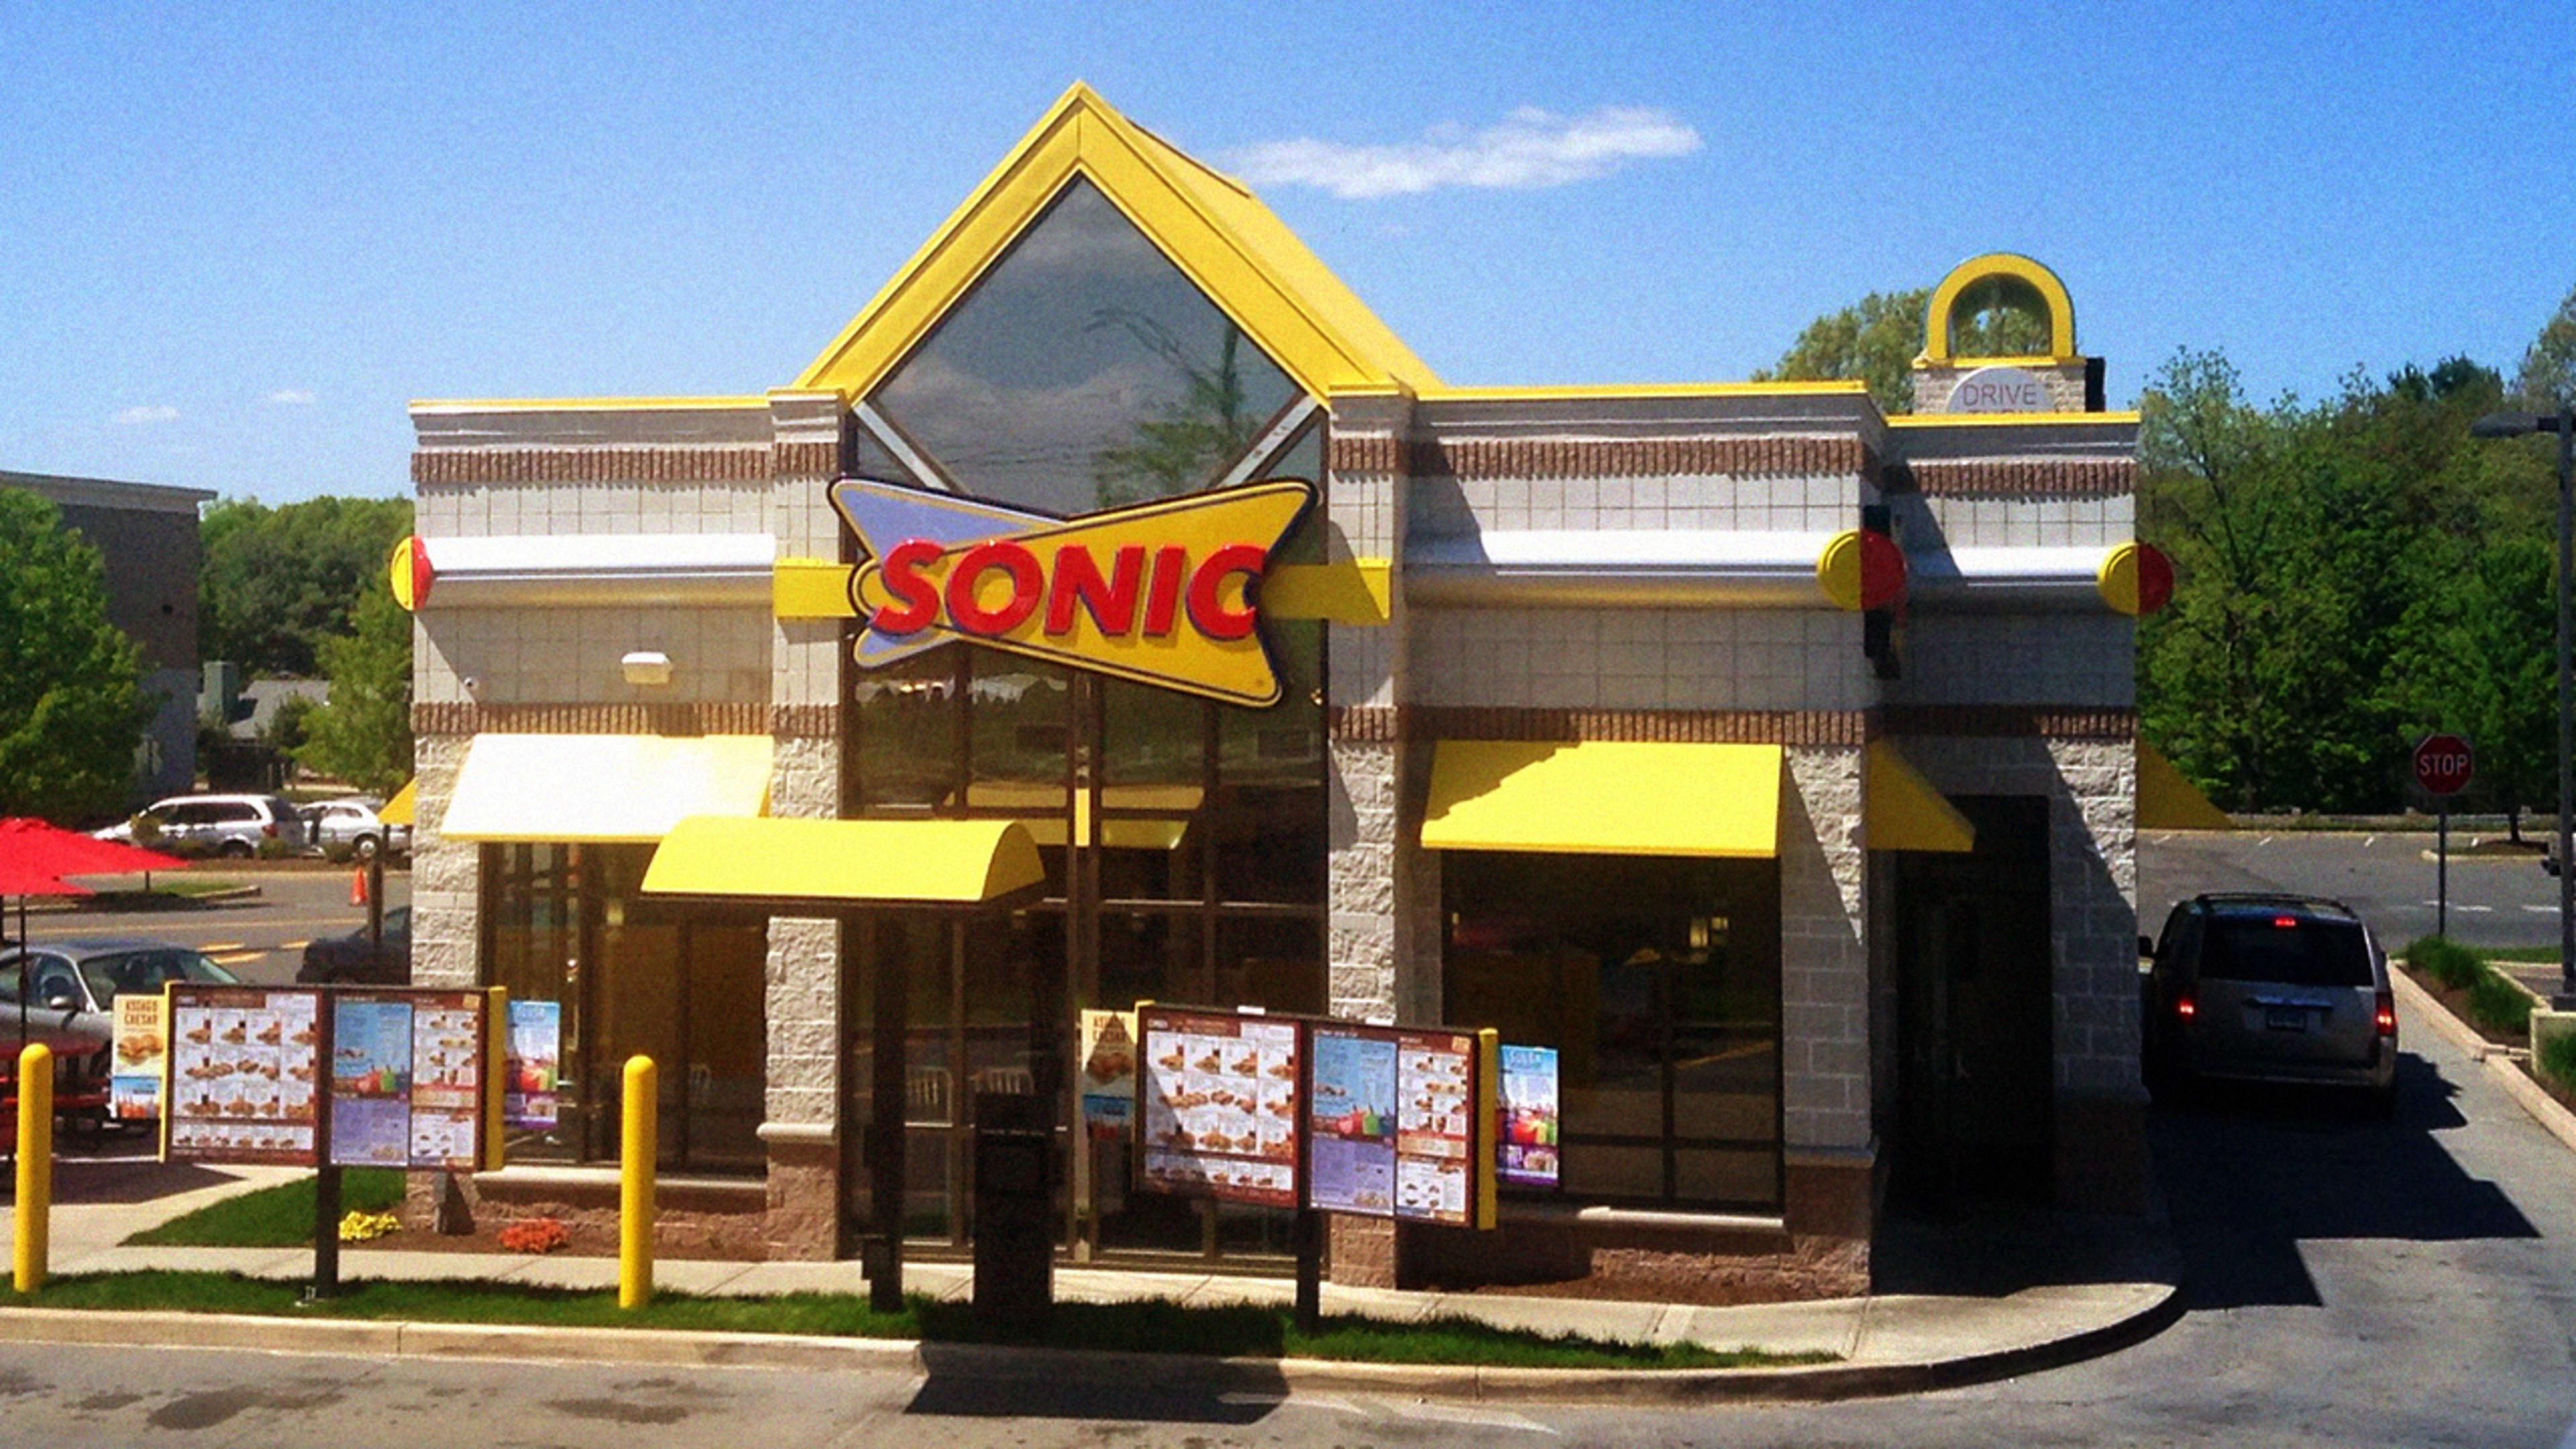 Ohio Sonic drive-in staff quit after wages were reportedly reduced to $4/hour